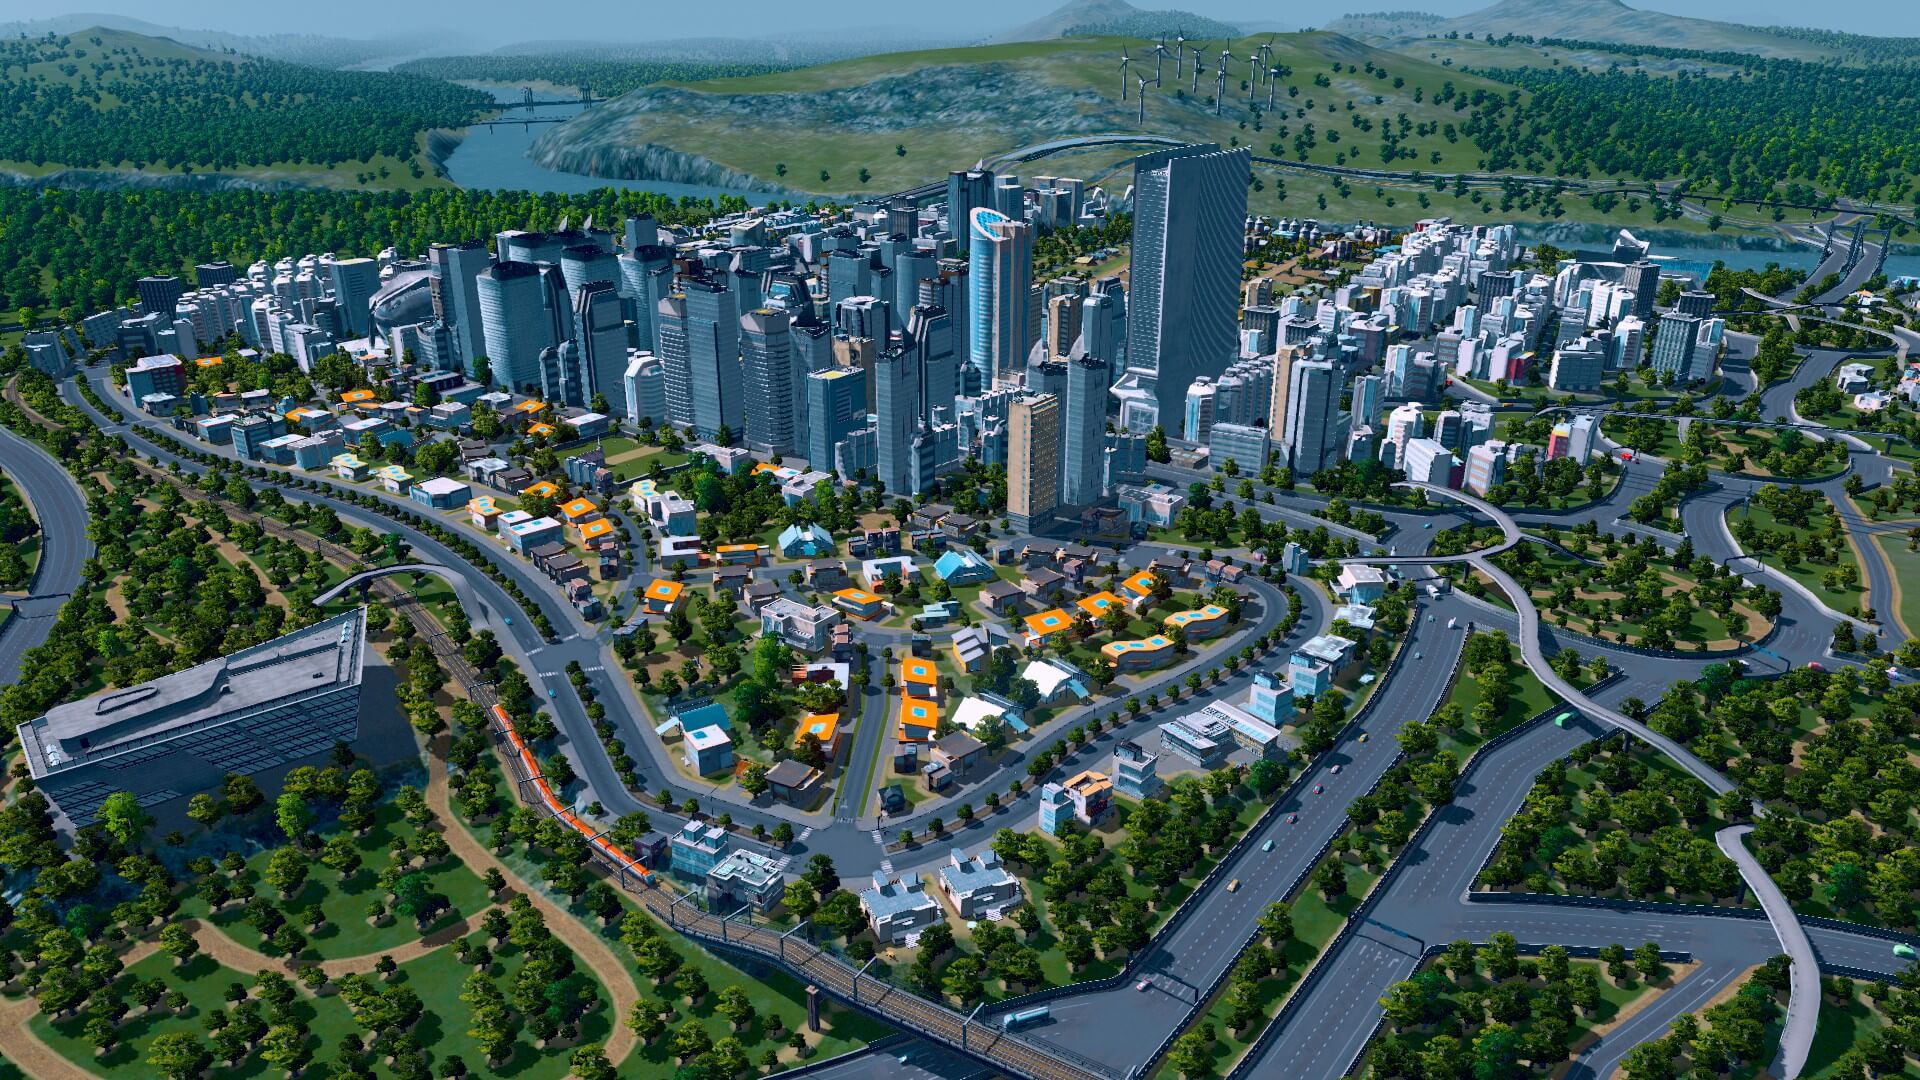 How To Download Cities Skylines Torrent For PC